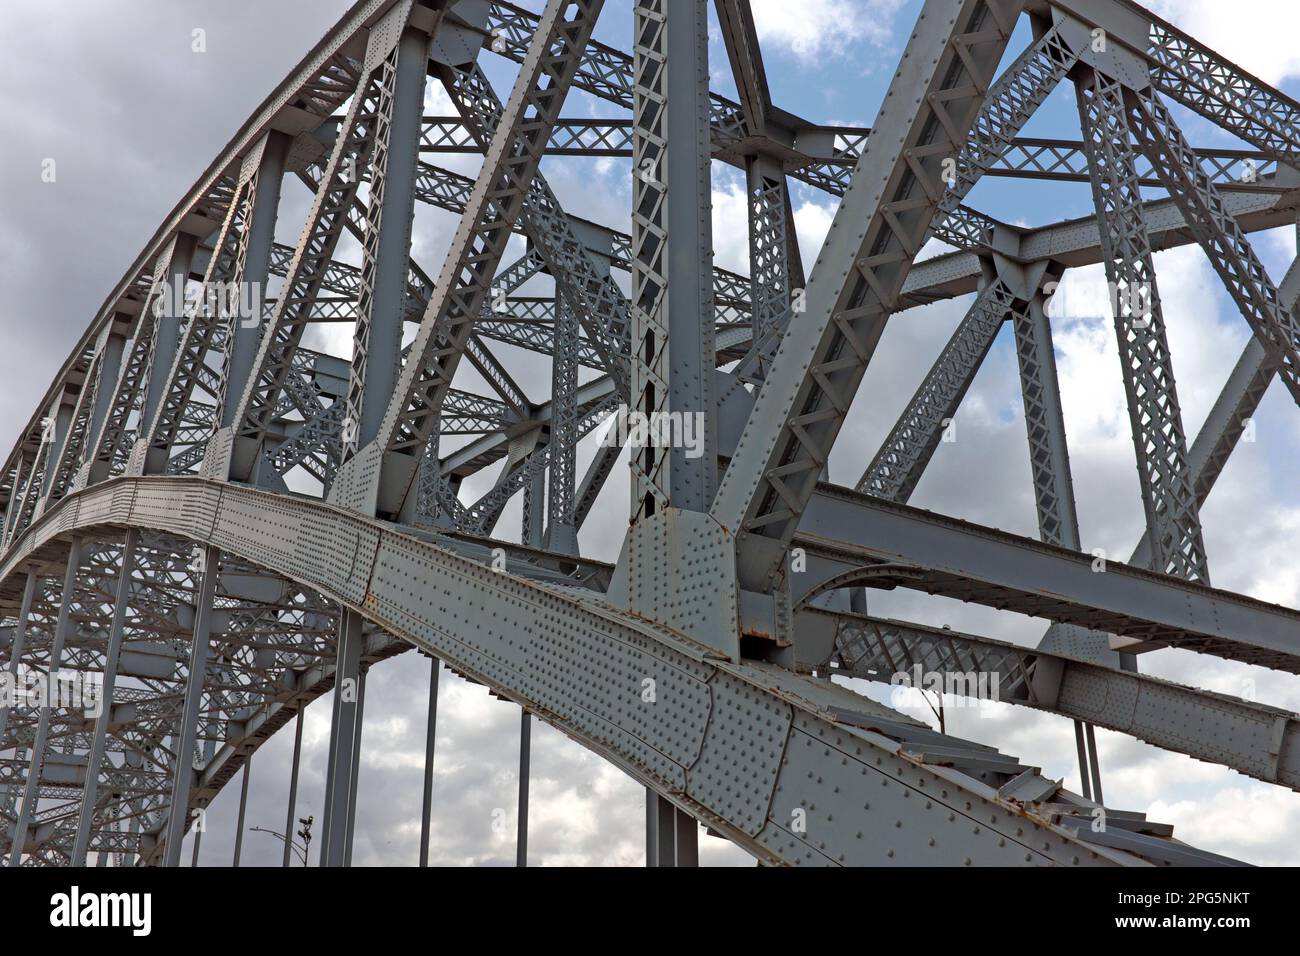 The steel infrastructure of the high level compression arch suspended deck bridge in Cleveland, Ohio, renamed the Veterans Memorial Bridge. Stock Photo